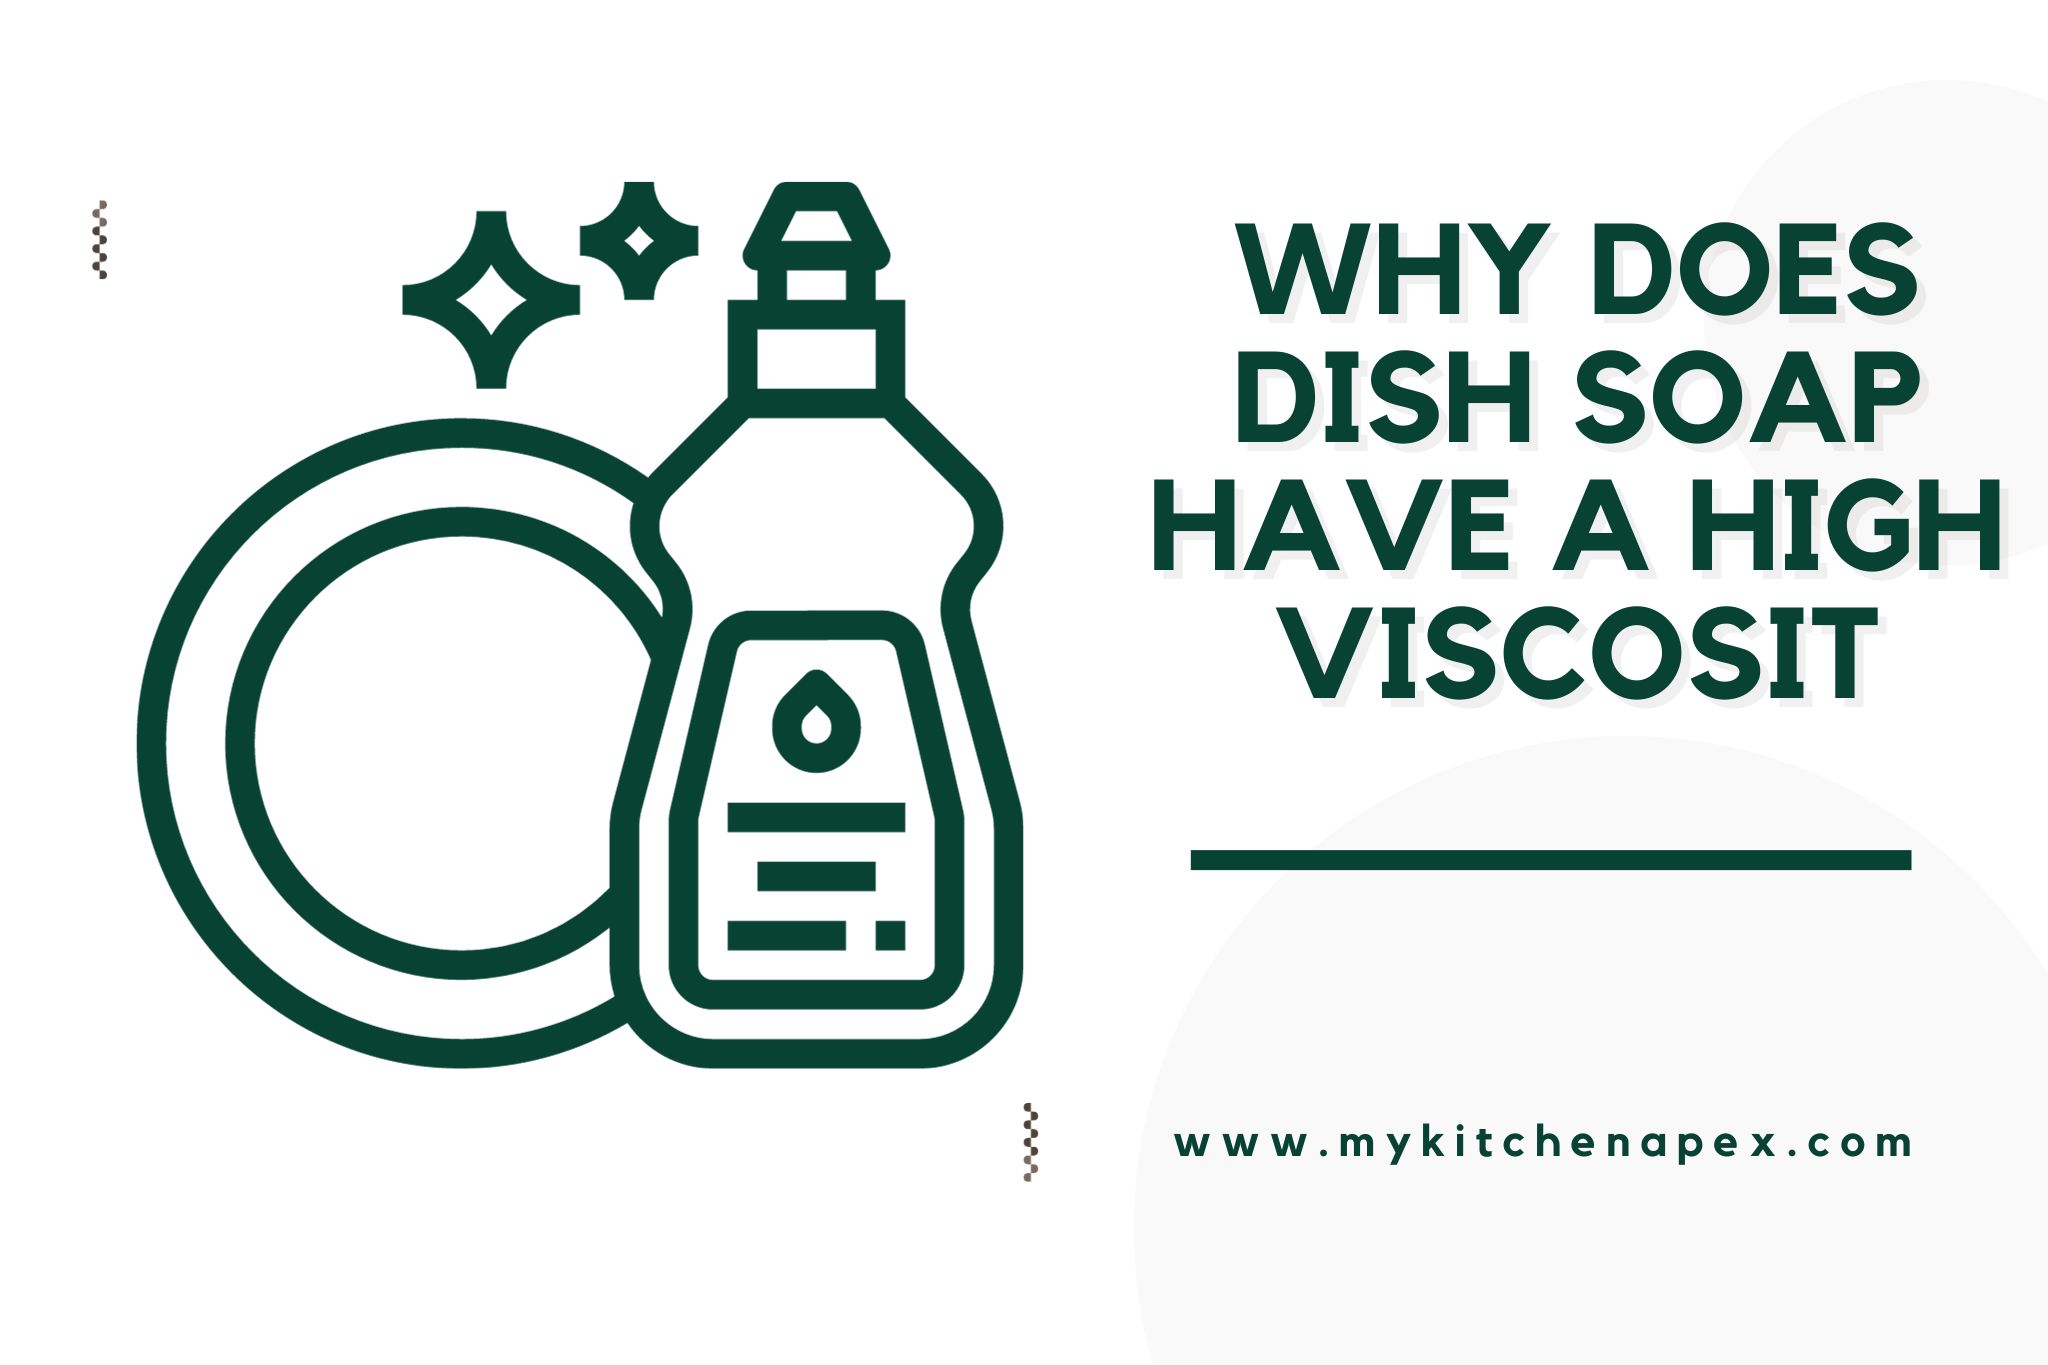 why does dish soap have a high viscosit